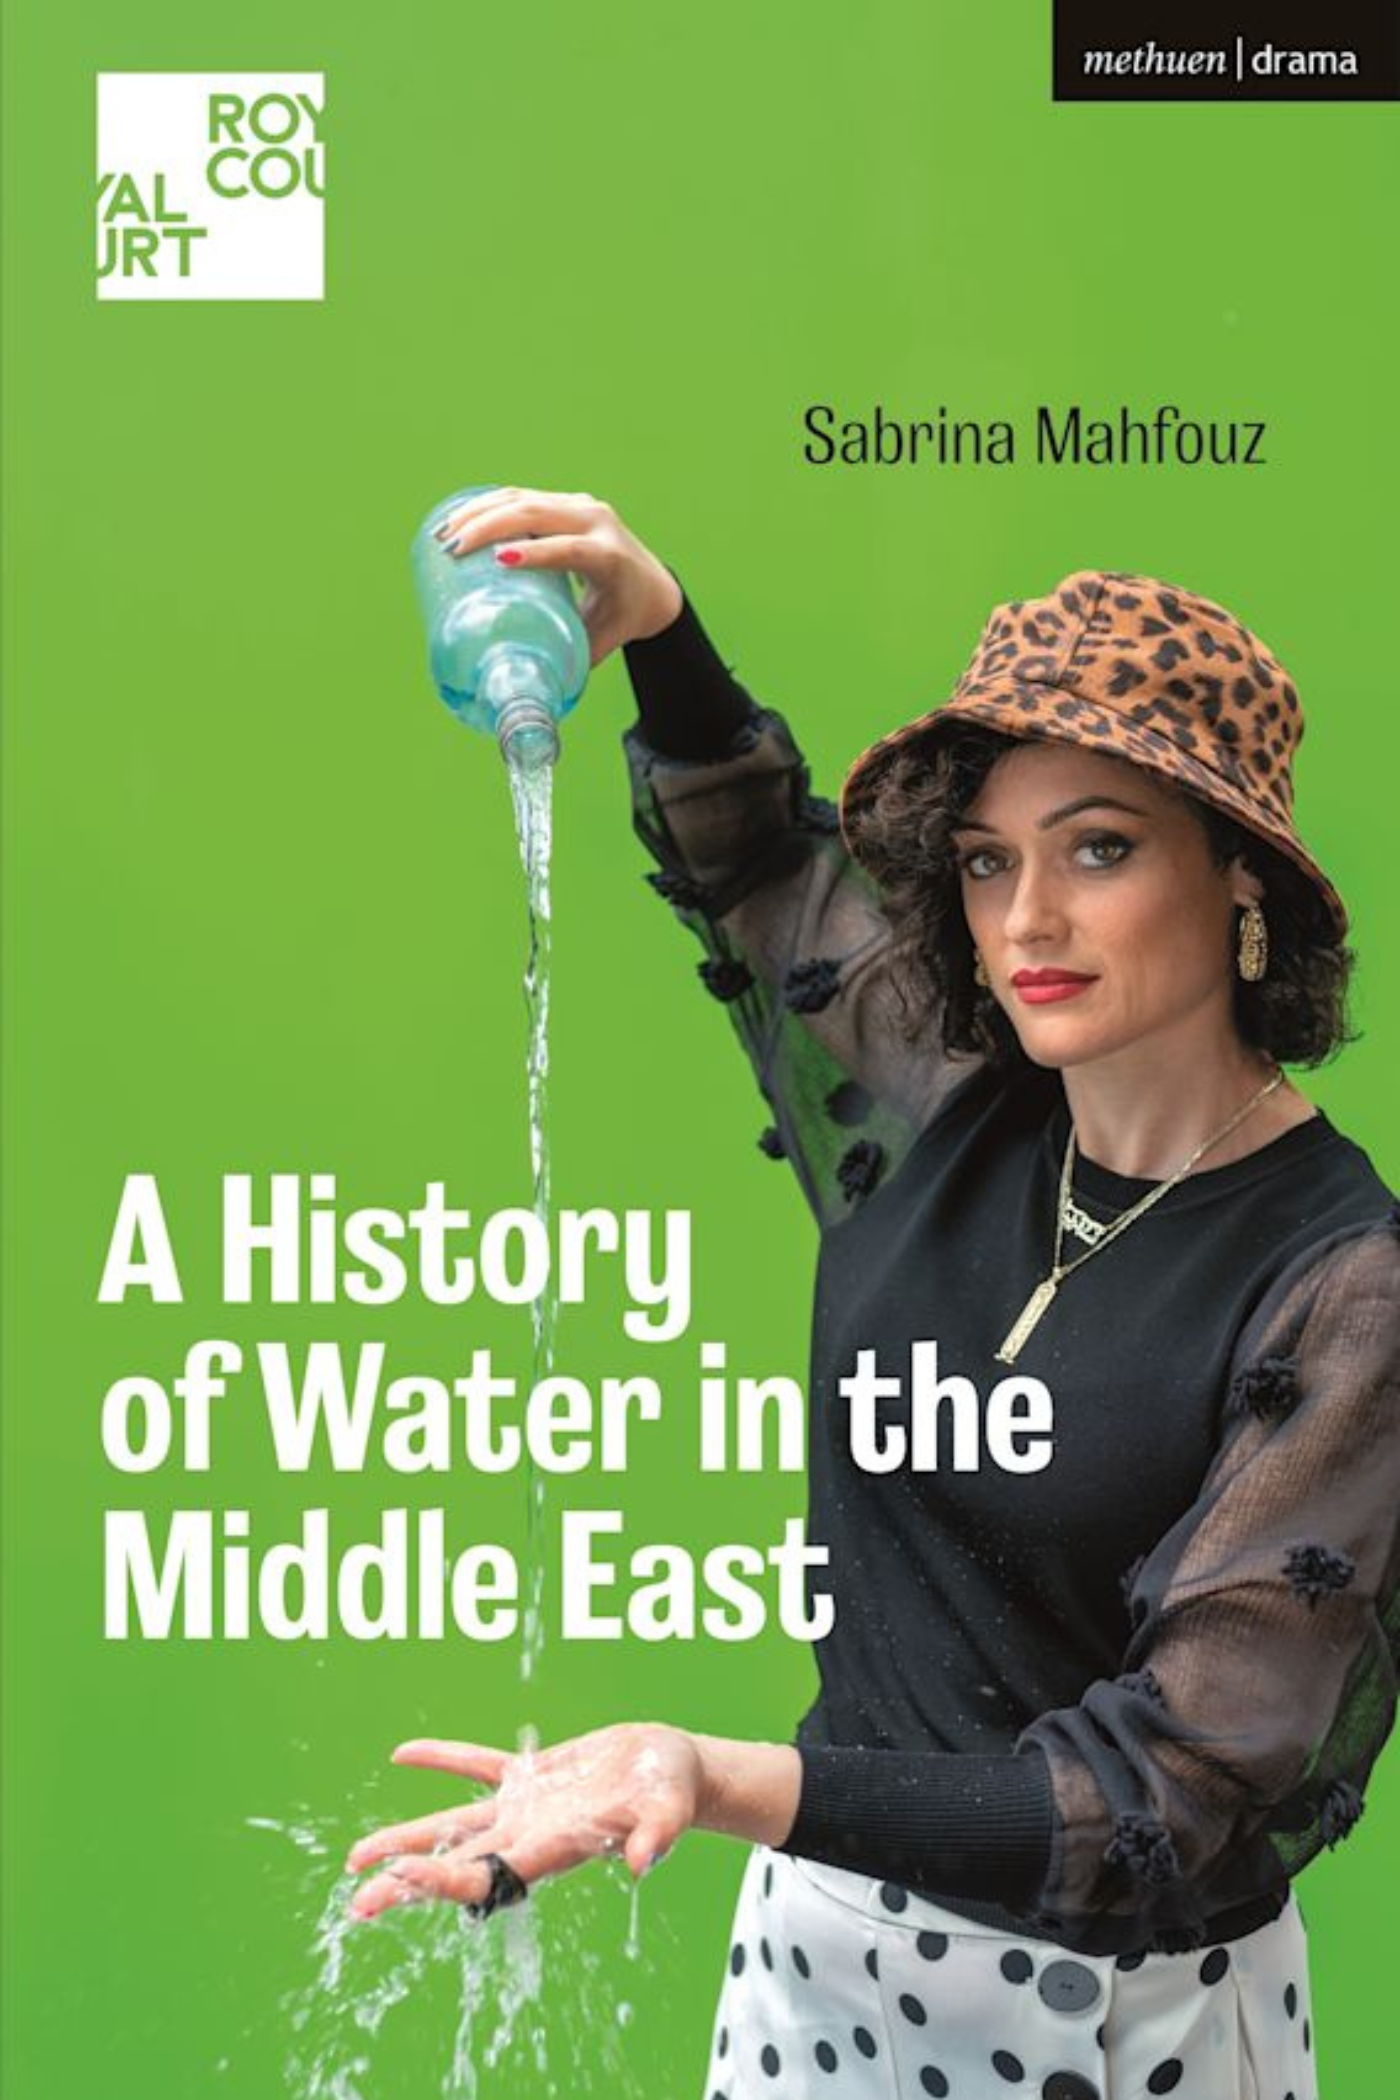 Sabrina Mahfouz, A History of Water in the Middle East Poster.png